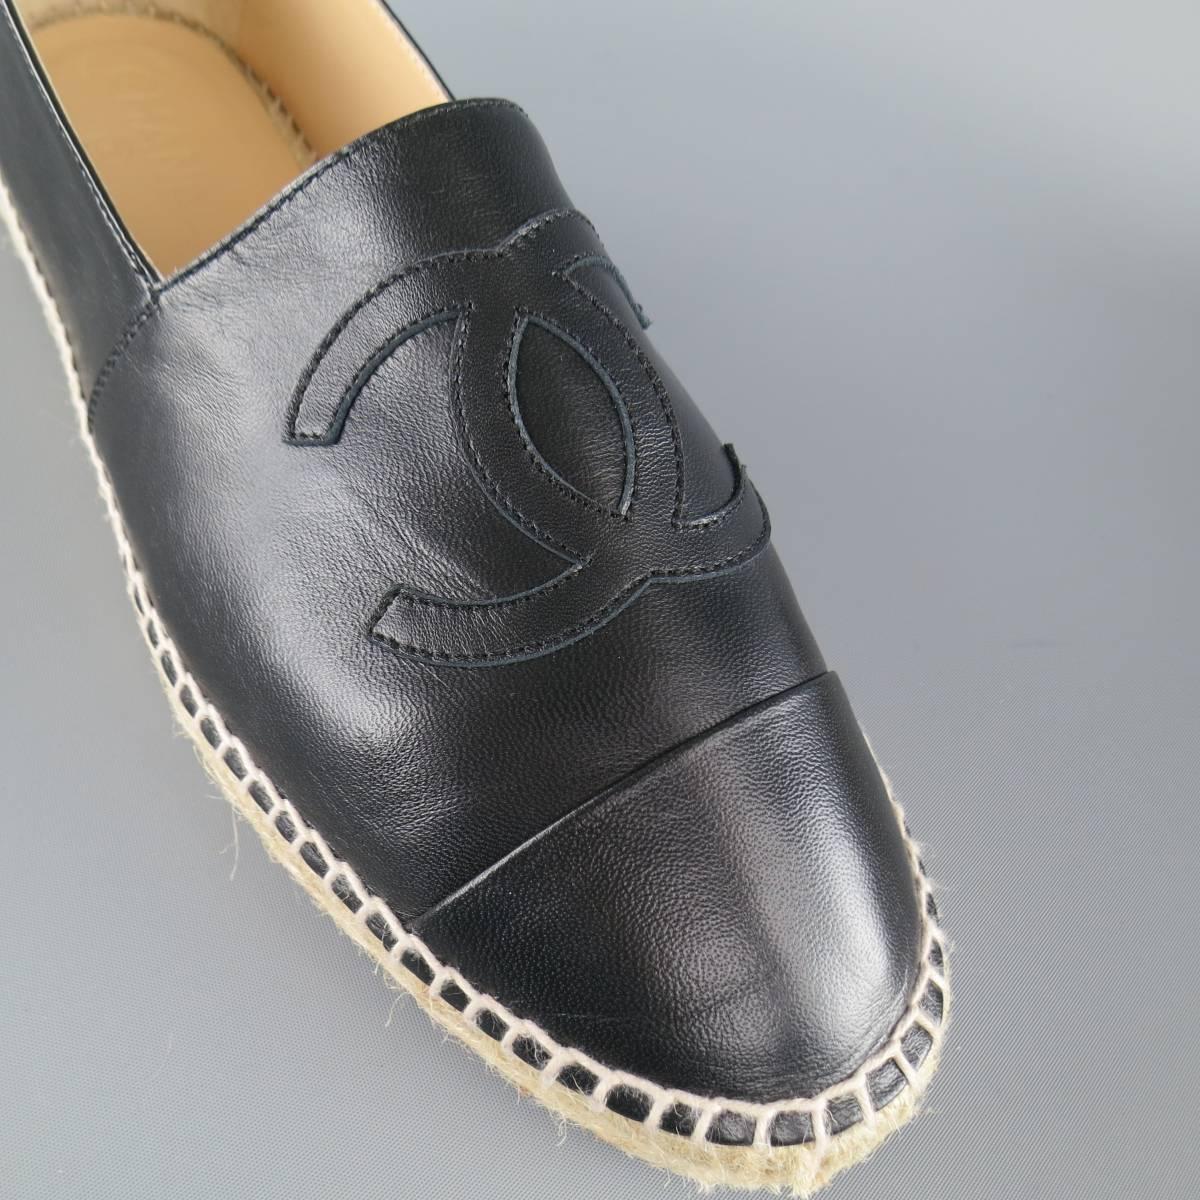 CHANEL espadrilles in a soft black lamb skin leather featuring a cap toe, CC logo and tan woven mid with rubber sole. With box. Made in Spain.
 
Excellent Pre-Owned Condition.
Marked: IT 42
 
Outsole: 11 x 3.25 in.